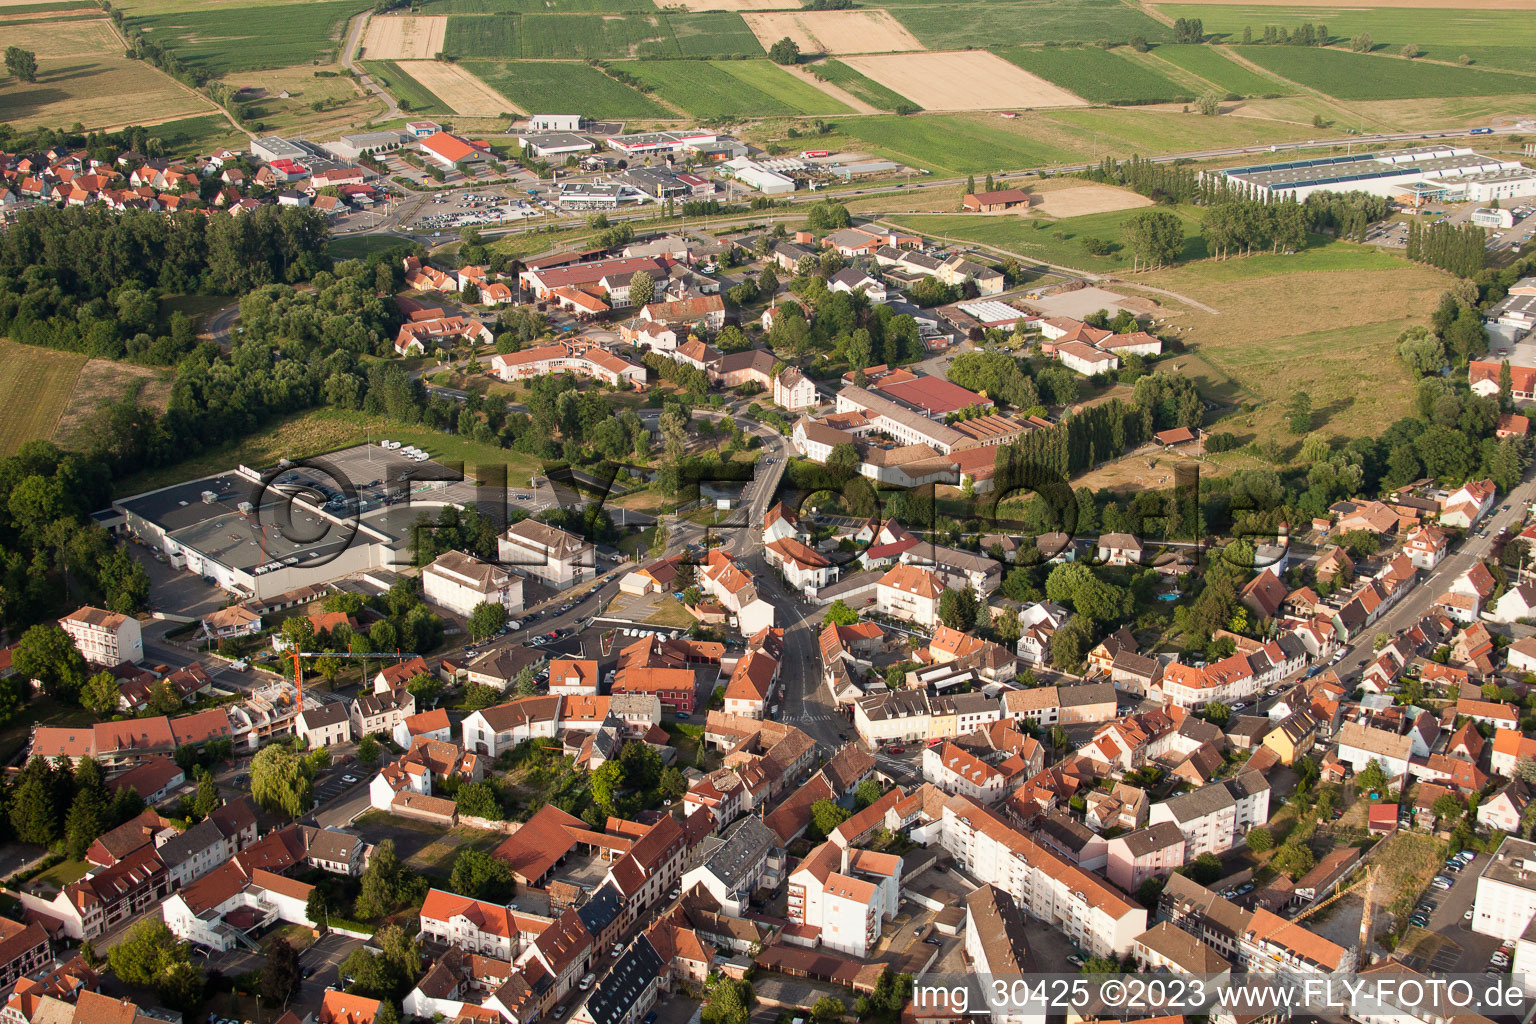 Bischwiller in the state Bas-Rhin, France viewn from the air